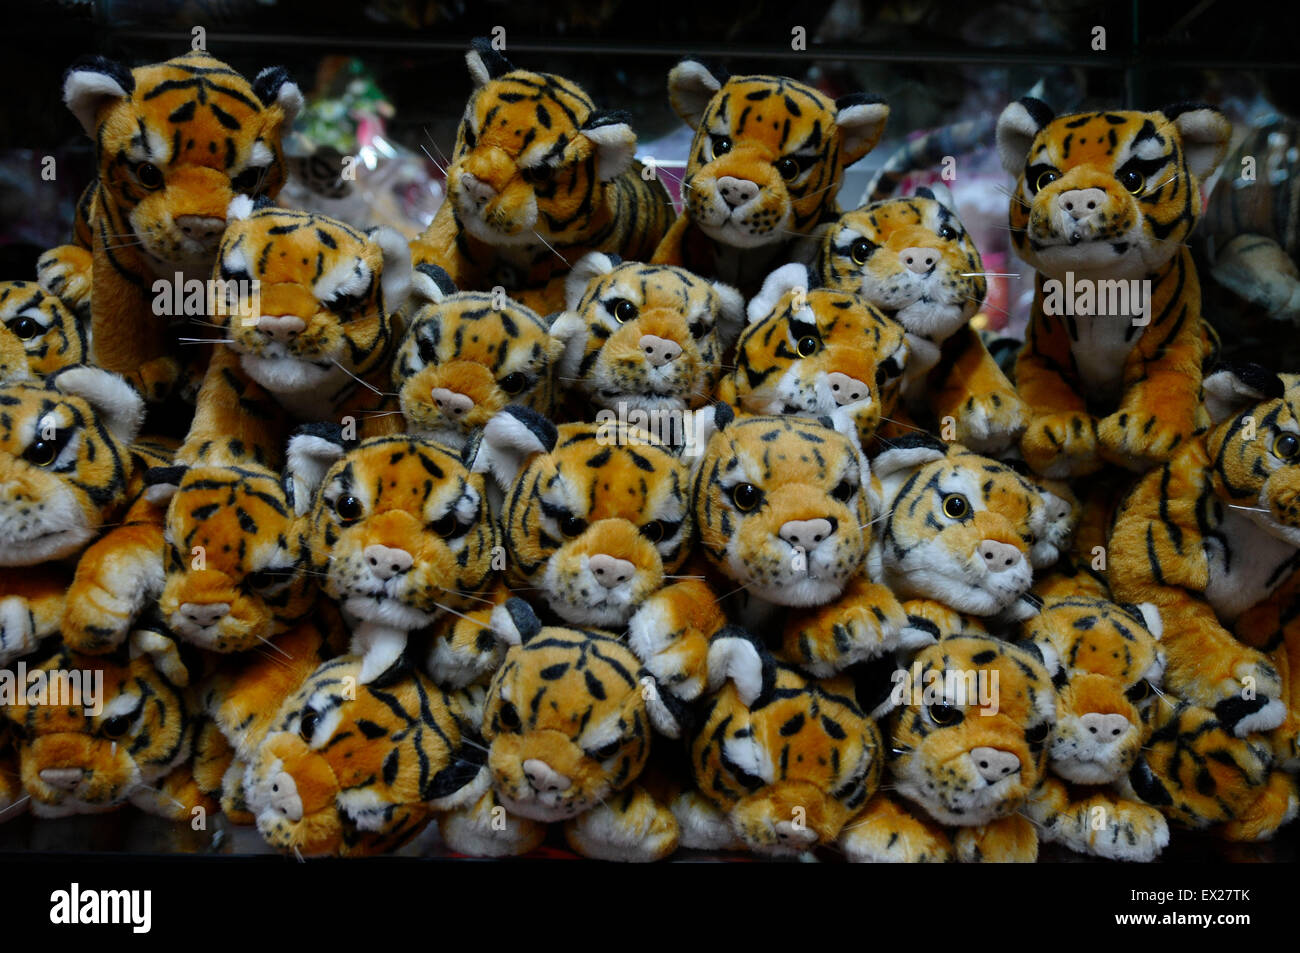 stuffed tiger for sale